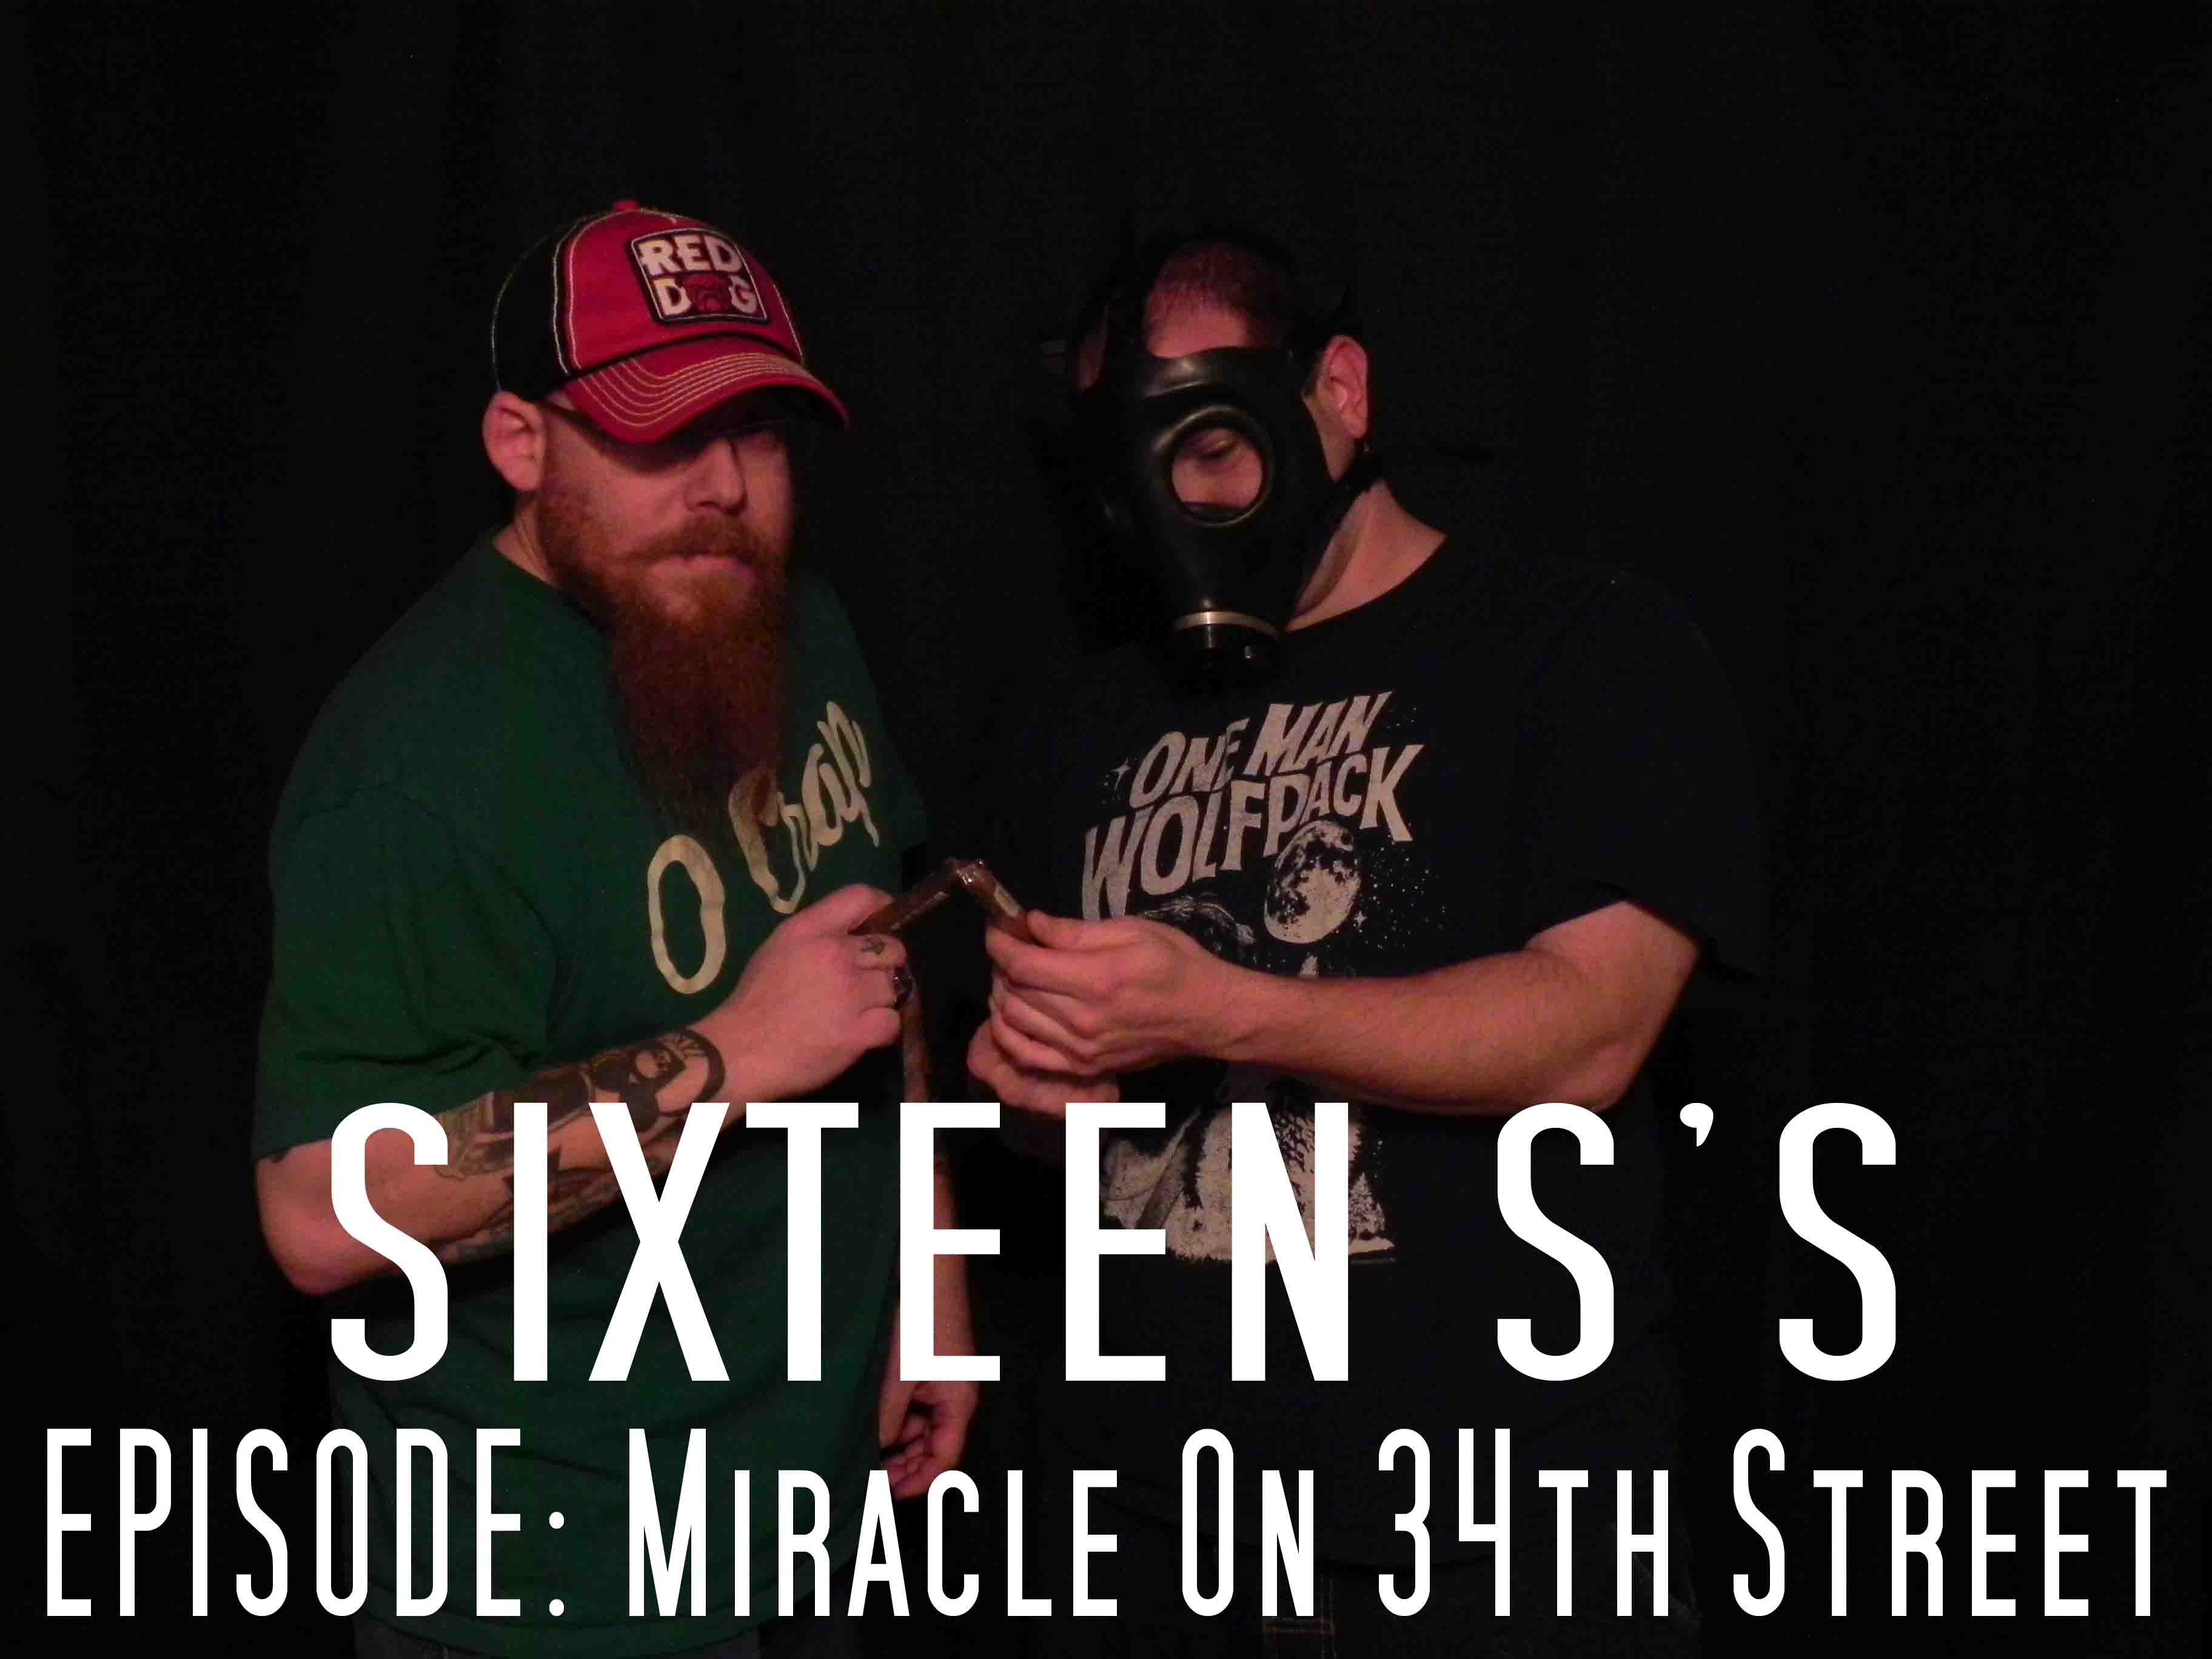 Sixteen S’s (Episode Miracle On 34th Street)